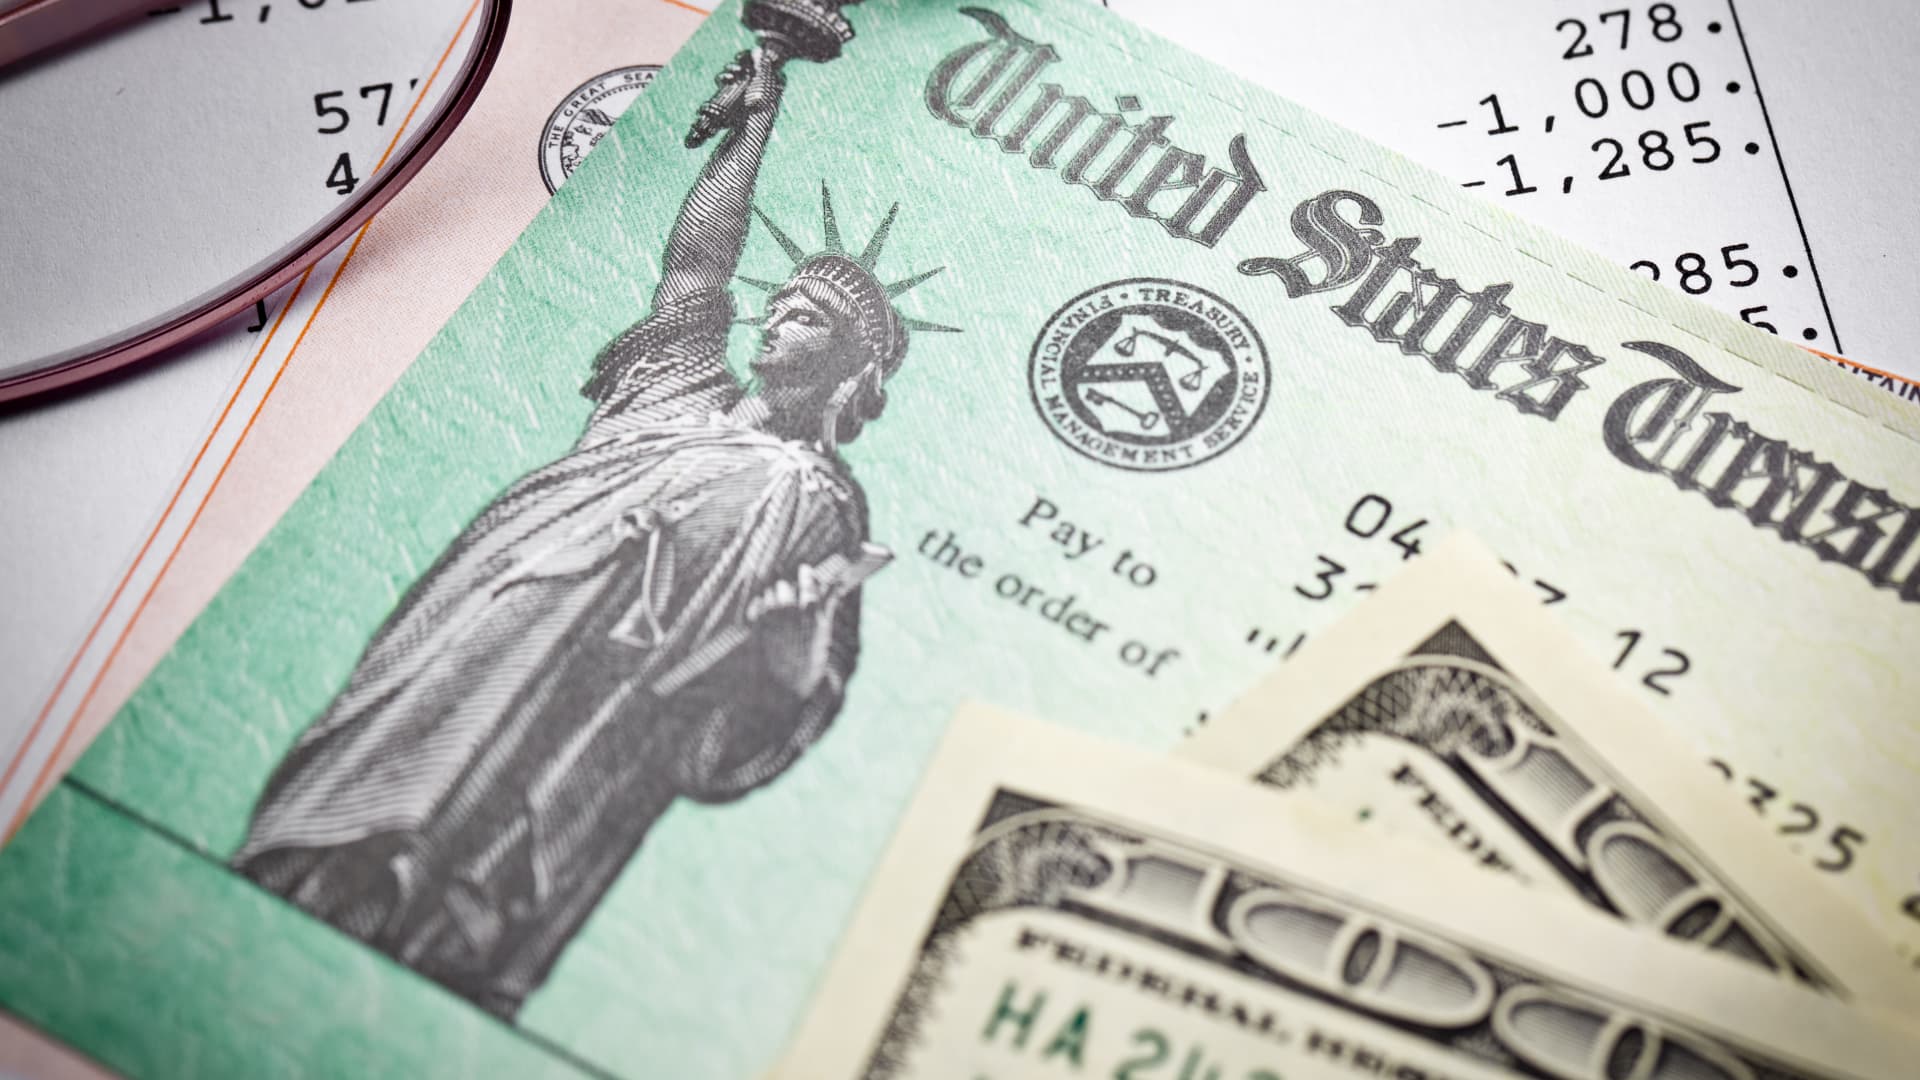 Here's the average tax refund through March 17, according to the IRS